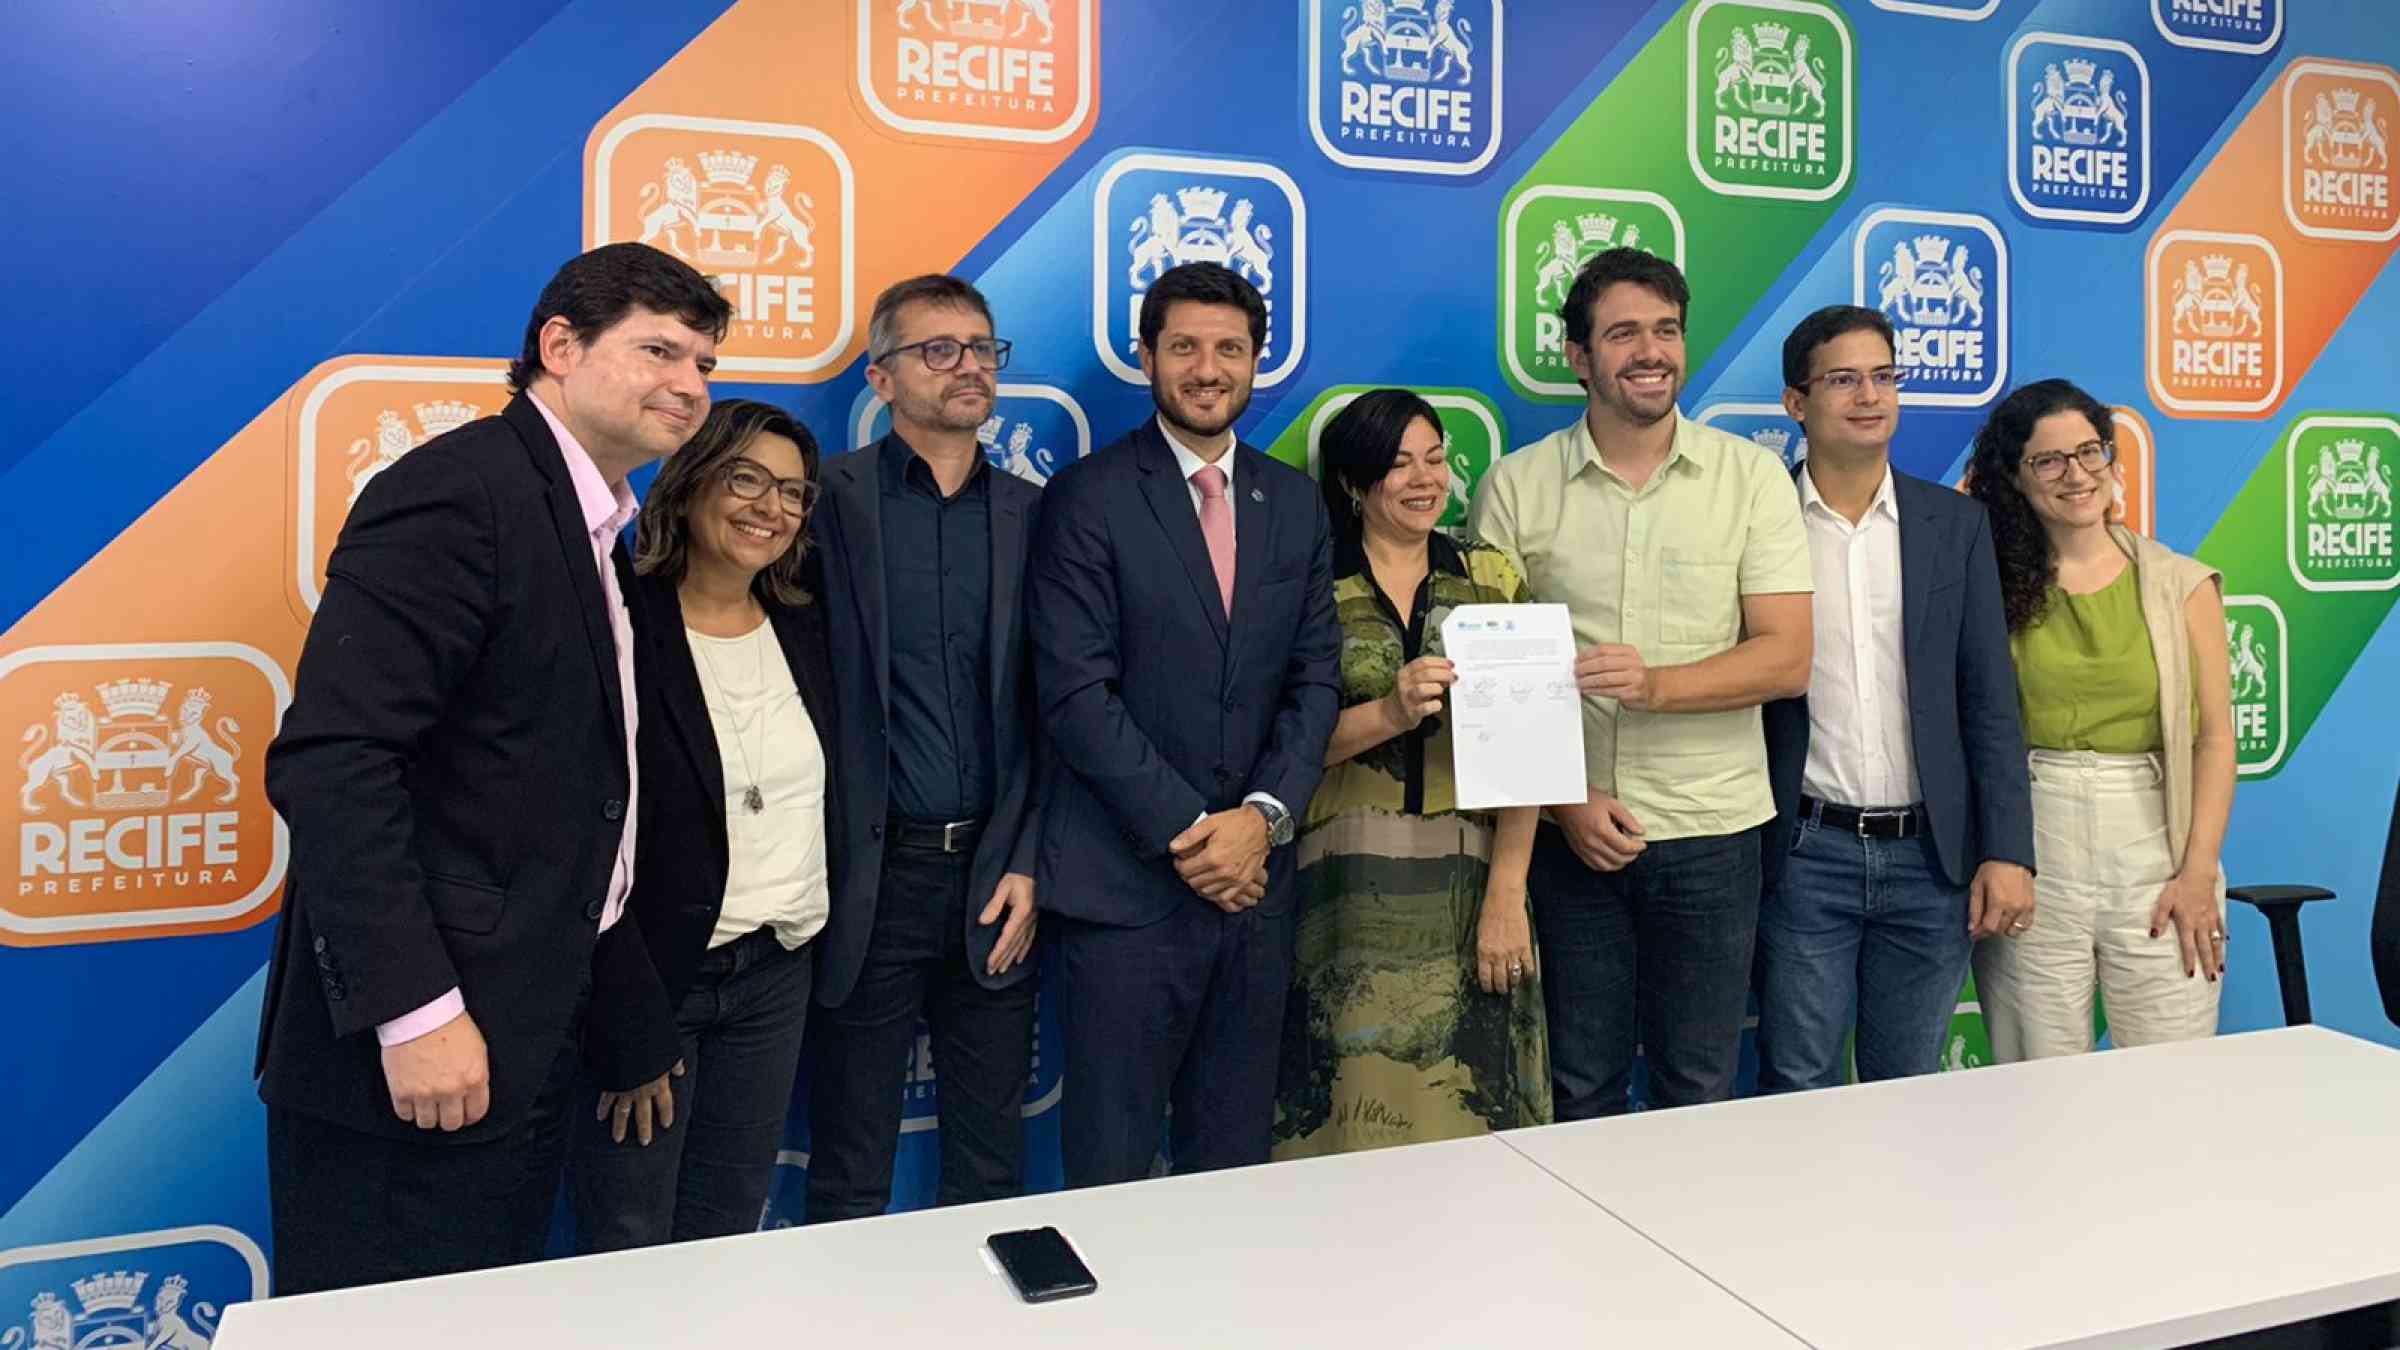 UNDRR and ICLEI join support to Recife to advance climate resilience and disaster preparedness under the MCR2030 initiative